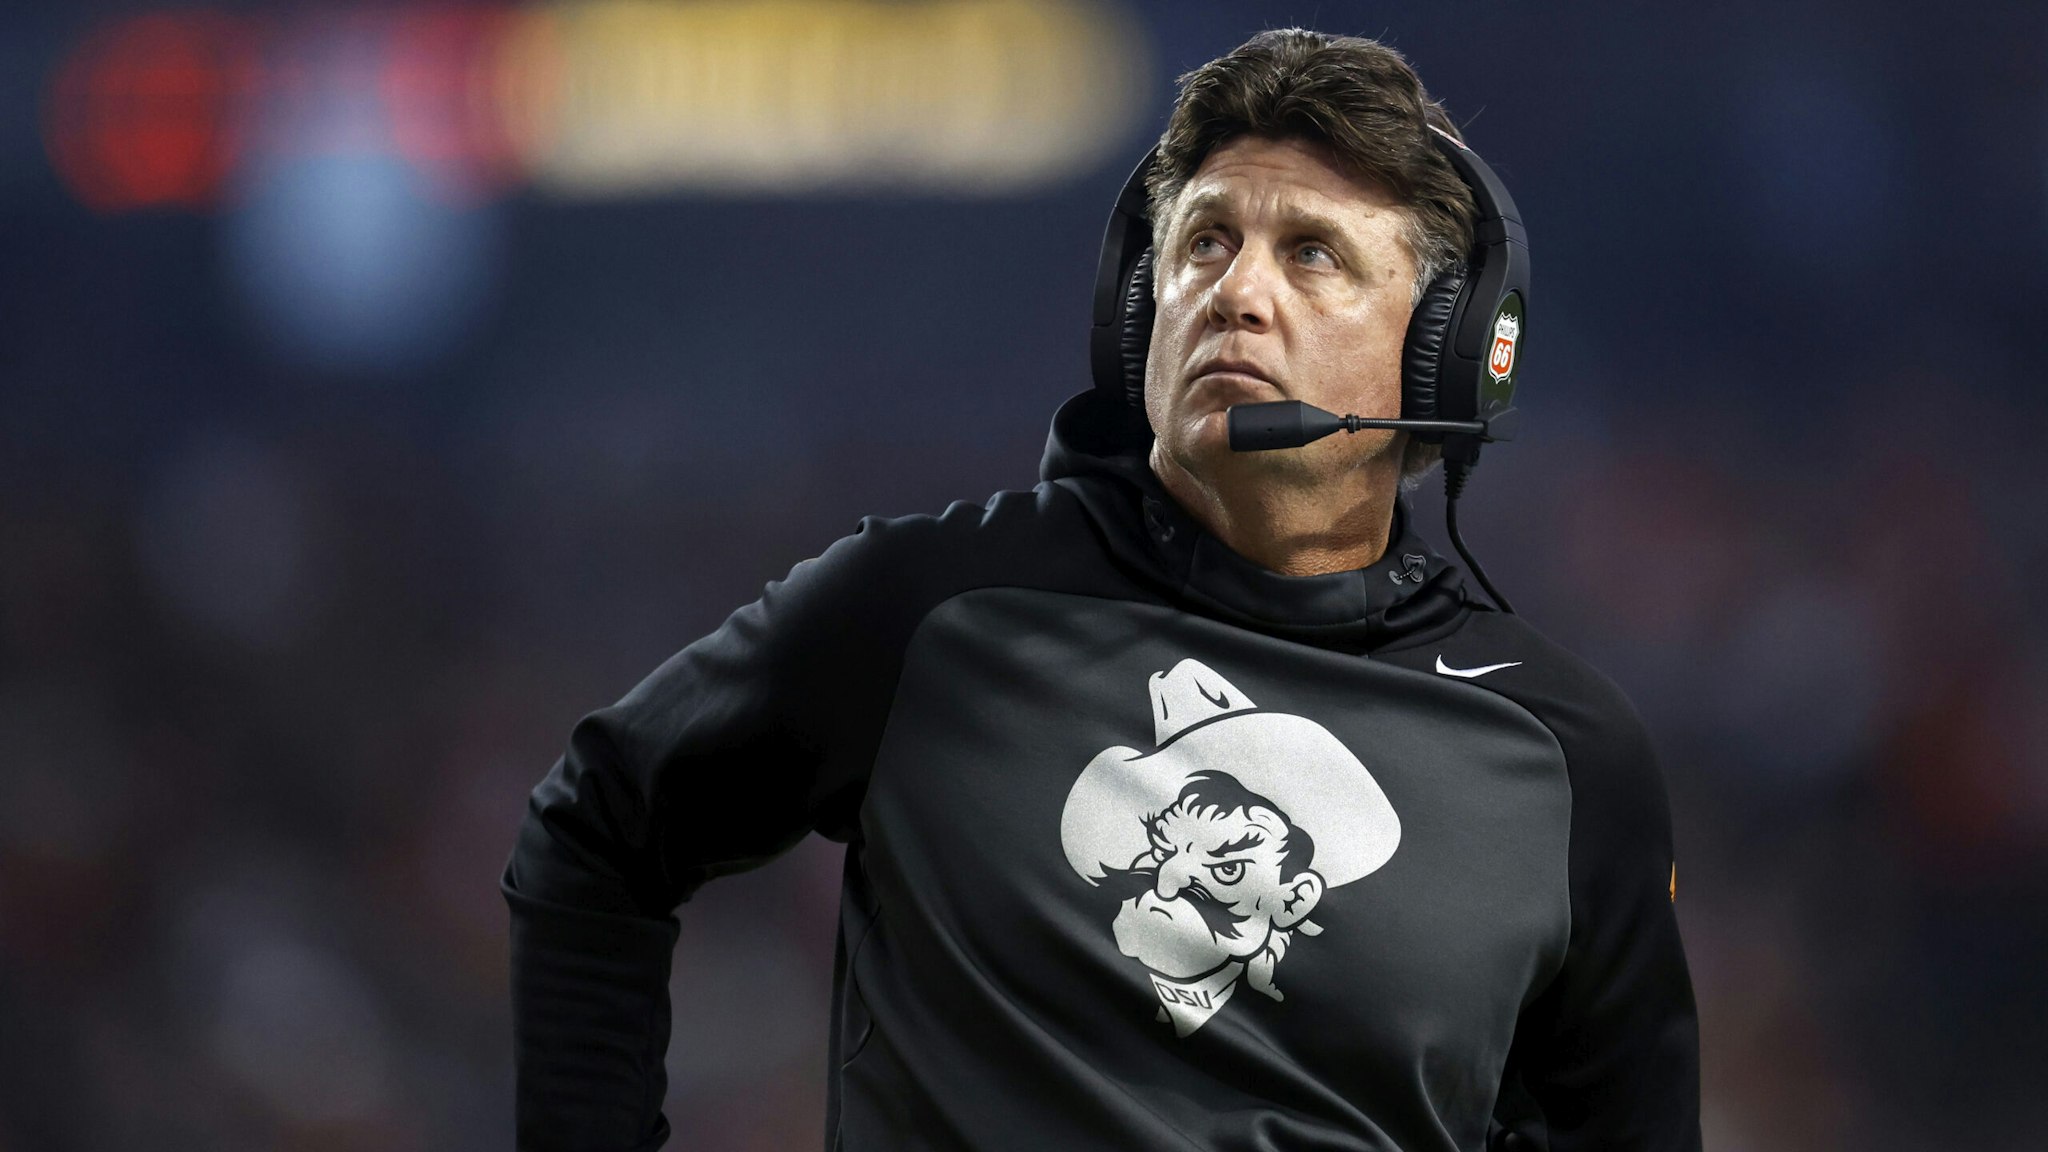 PHOENIX, ARIZONA - DECEMBER 27: Head coach Mike Gundy of the Oklahoma State Cowboys looks on during the first half of the Guaranteed Rate Bowl against the Wisconsin Badgers at Chase Field on December 27, 2022 in Phoenix, Arizona.